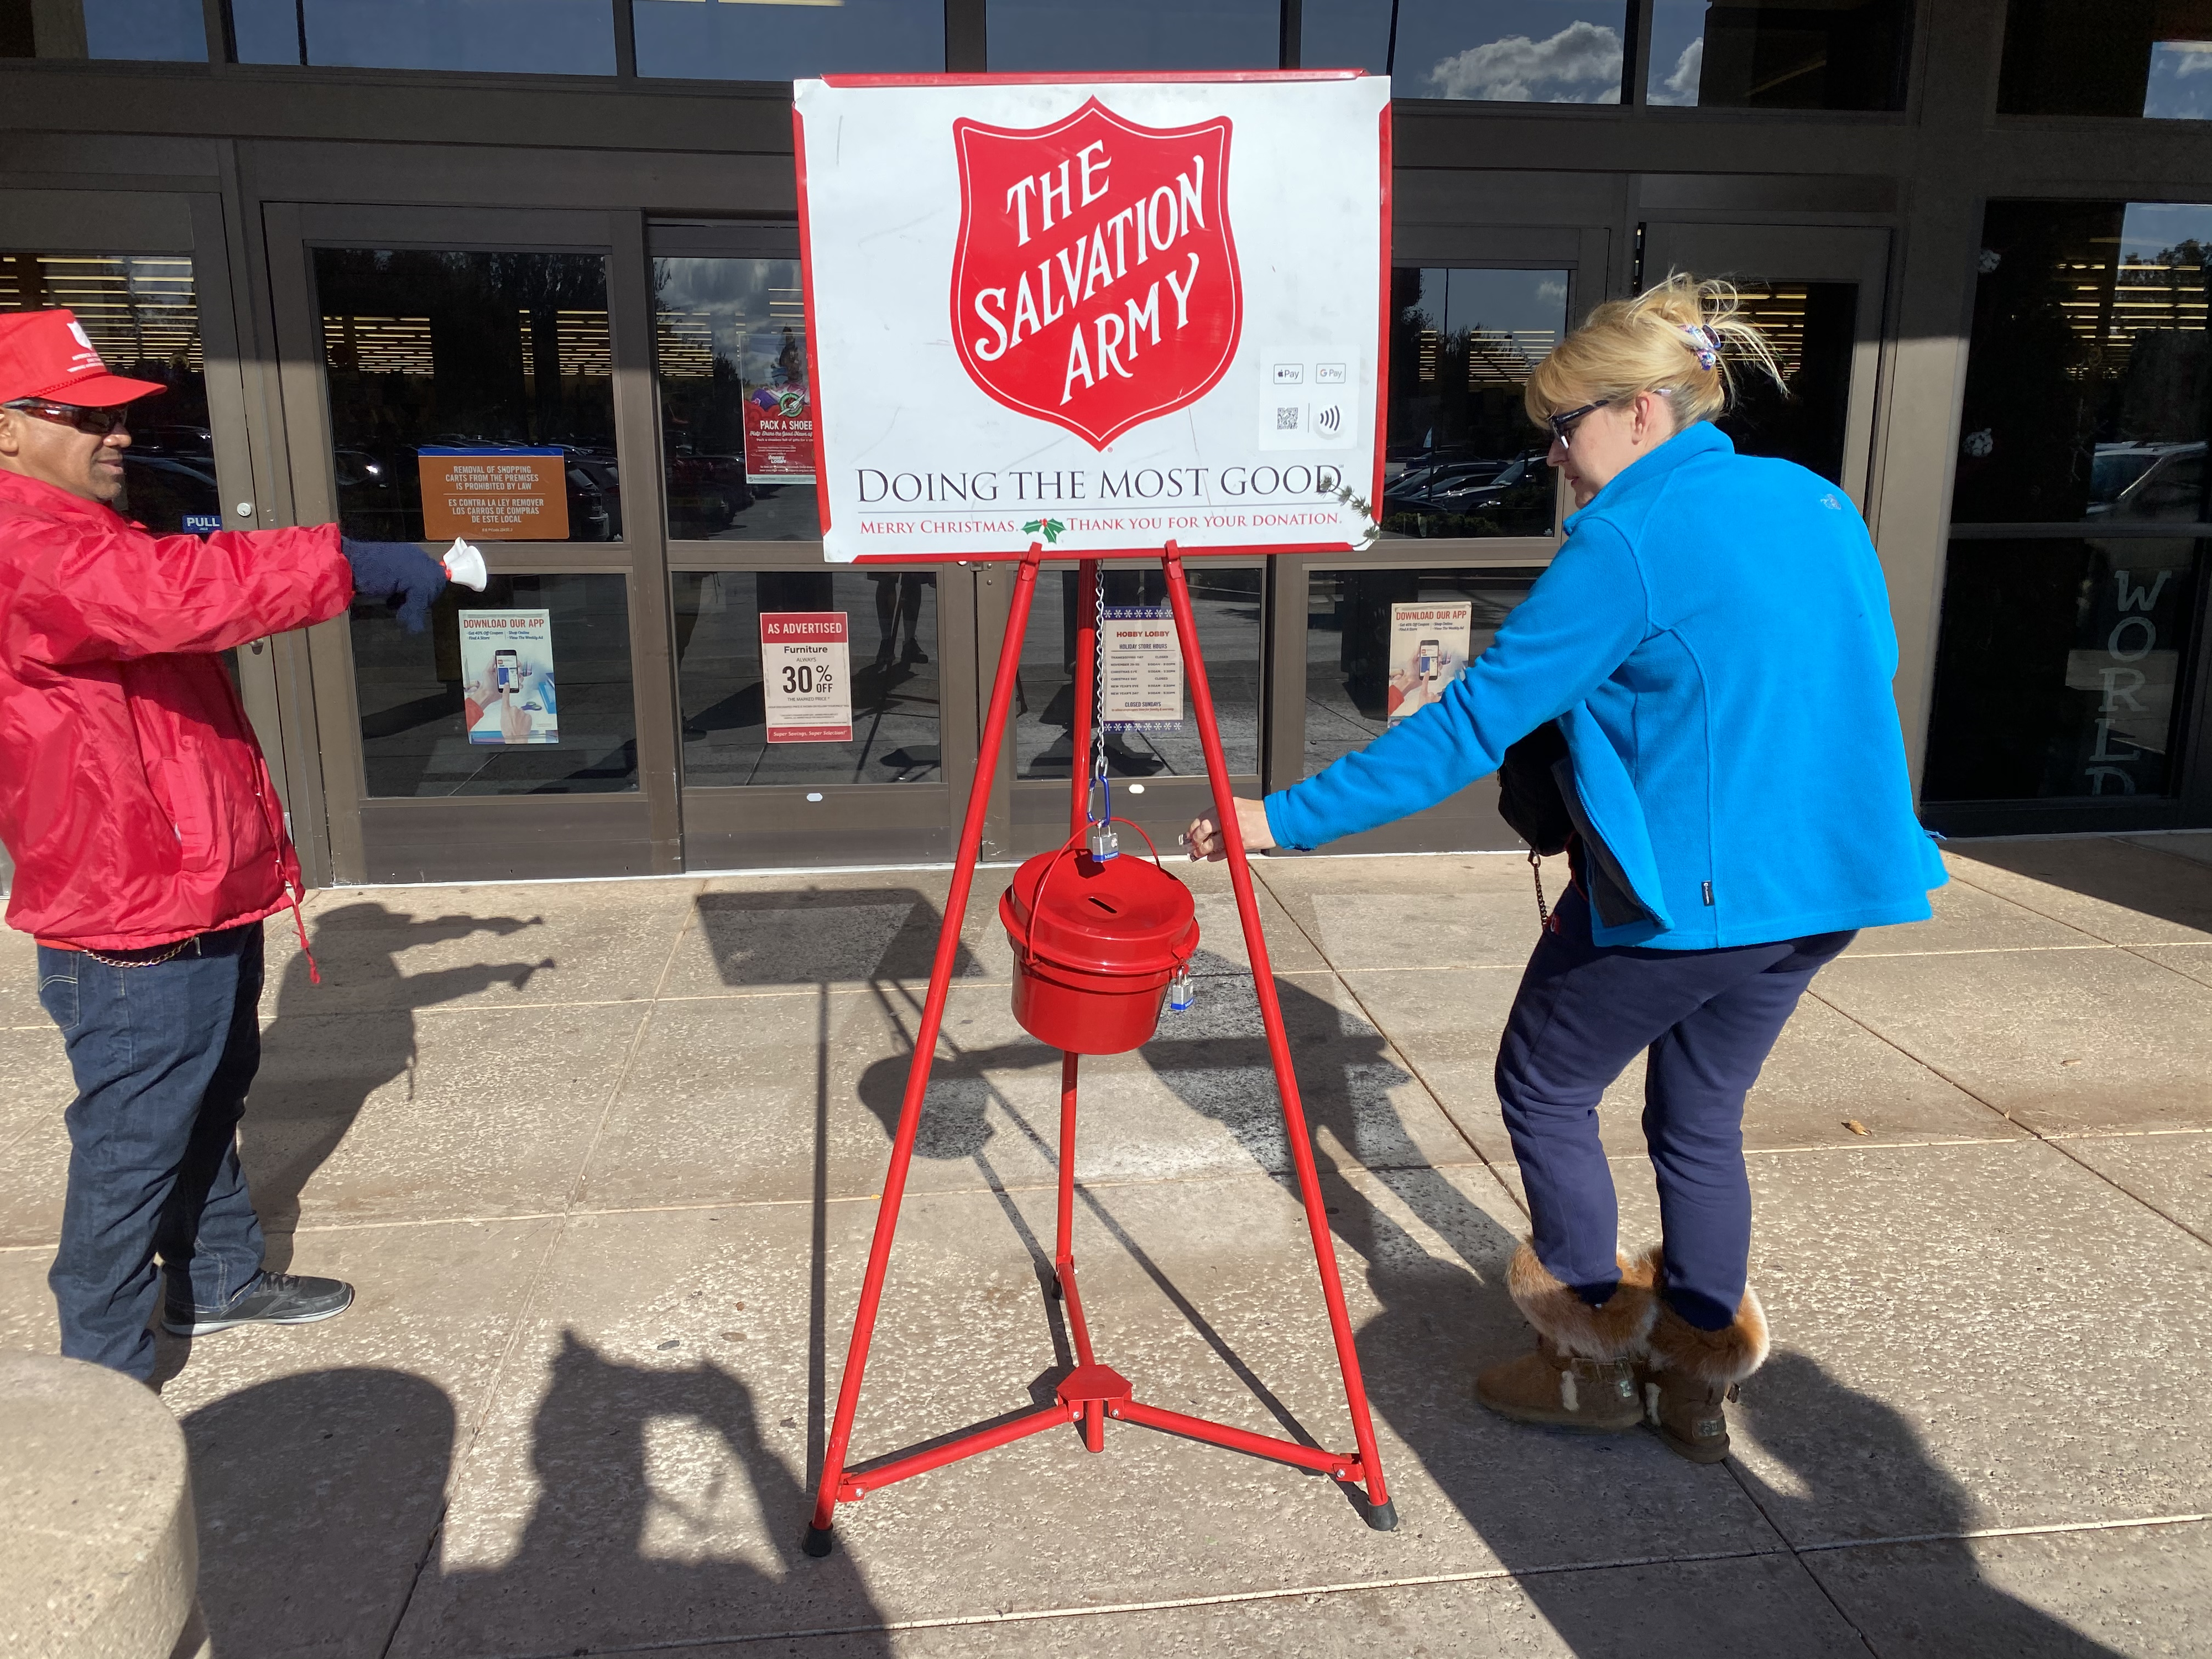 You Can Now Donate to The Salvation Army On Your Smartphone